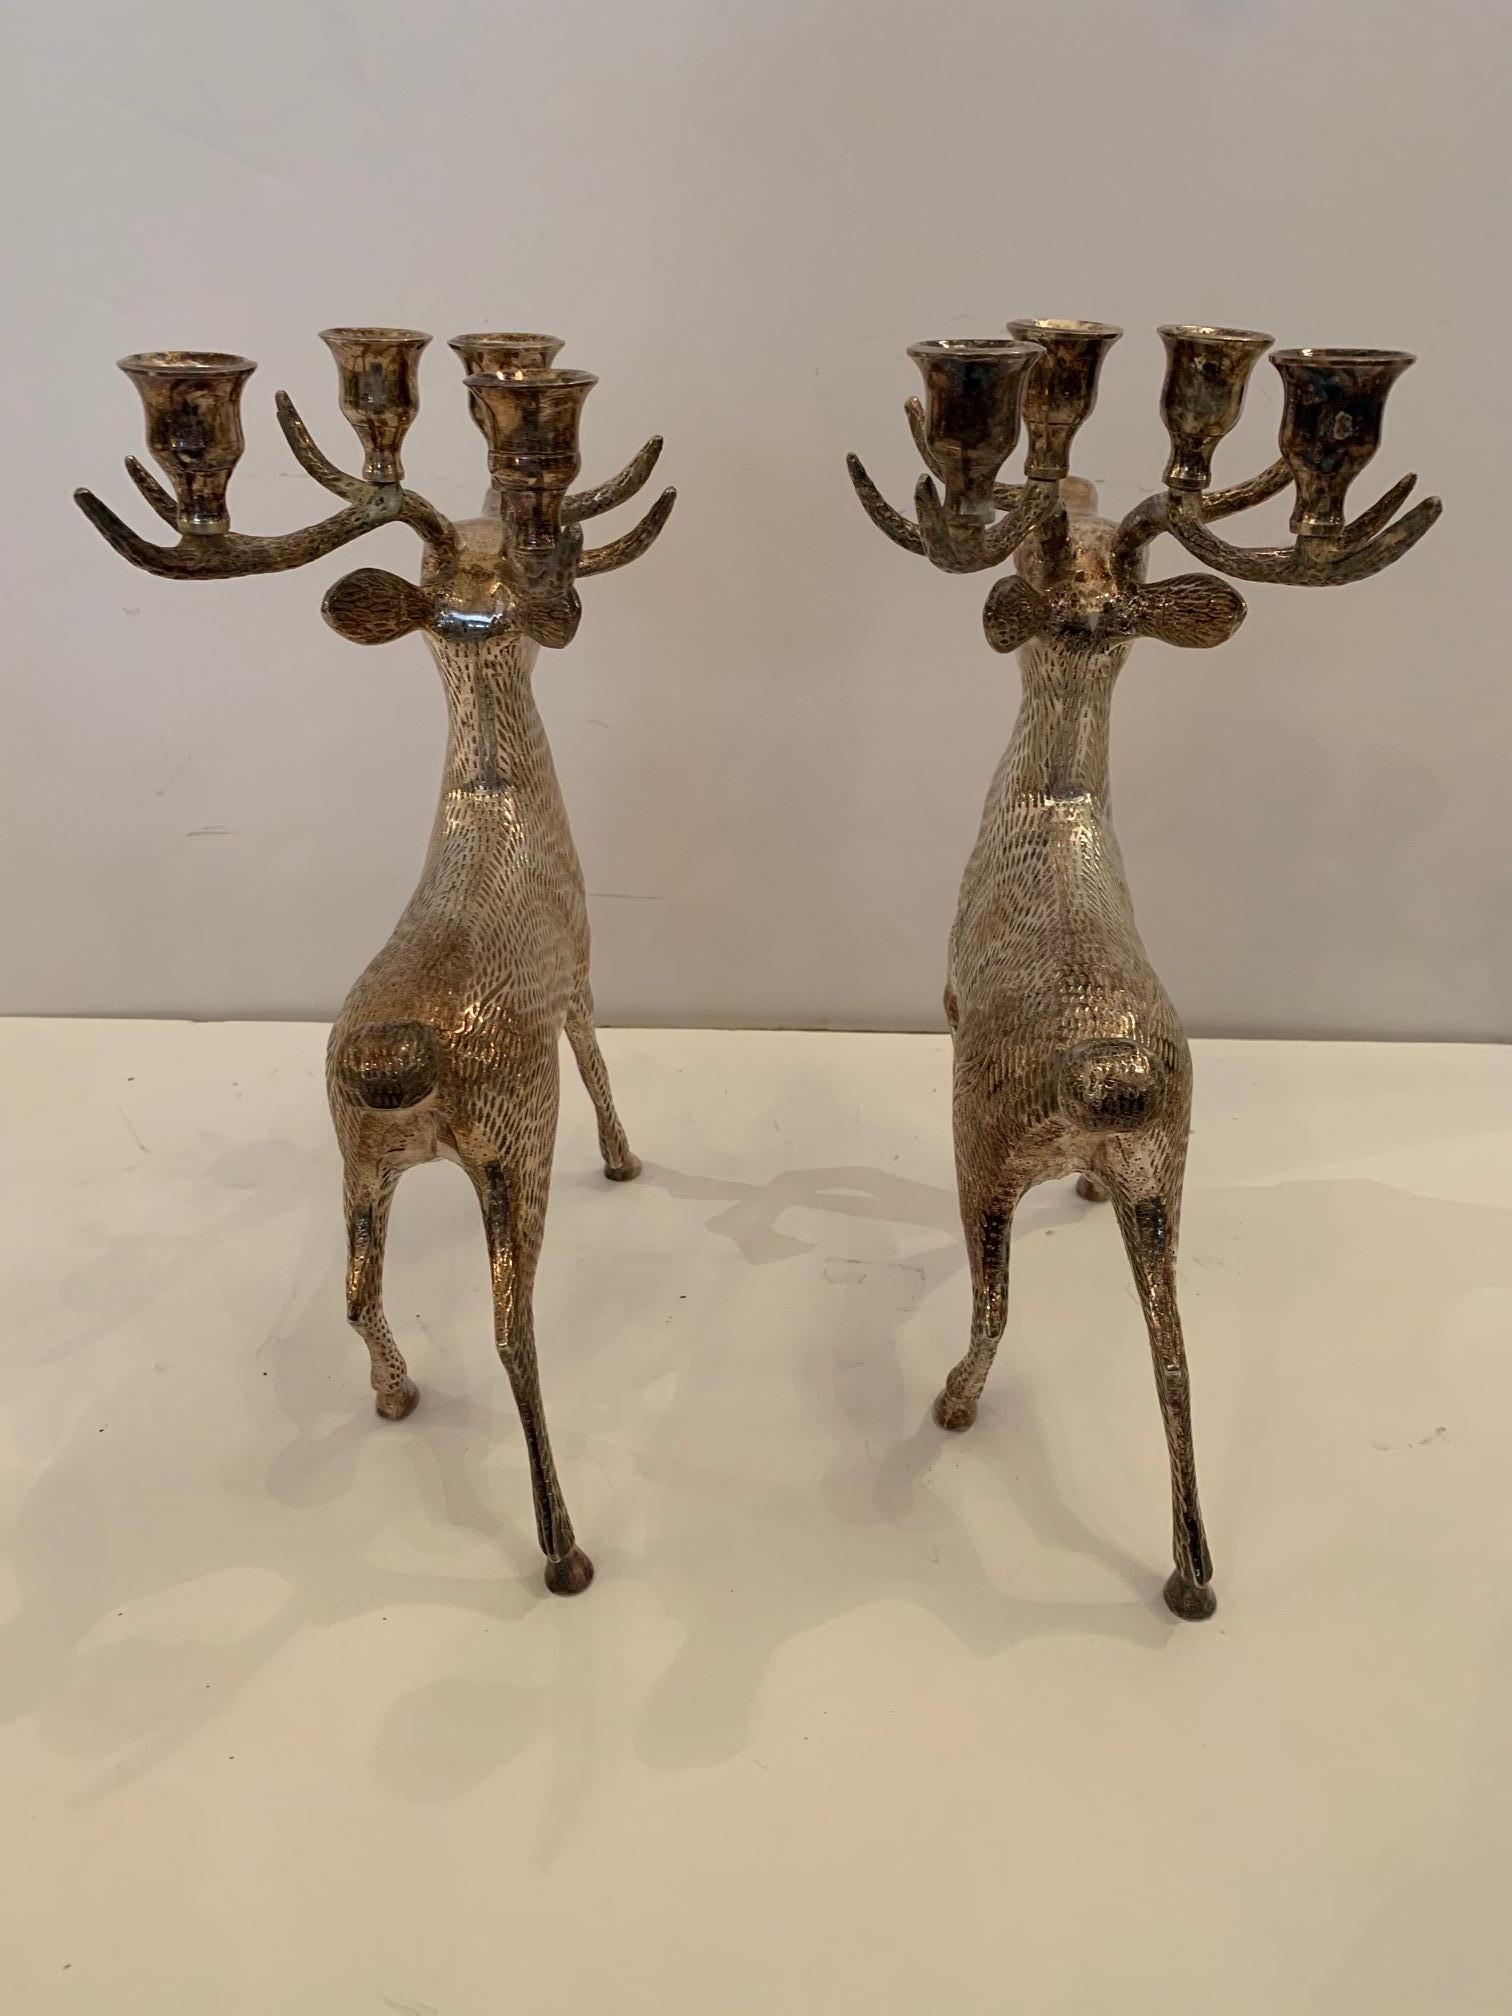 Delightful Pair of Silver Plated Brass Stag Deer Candleholders 1